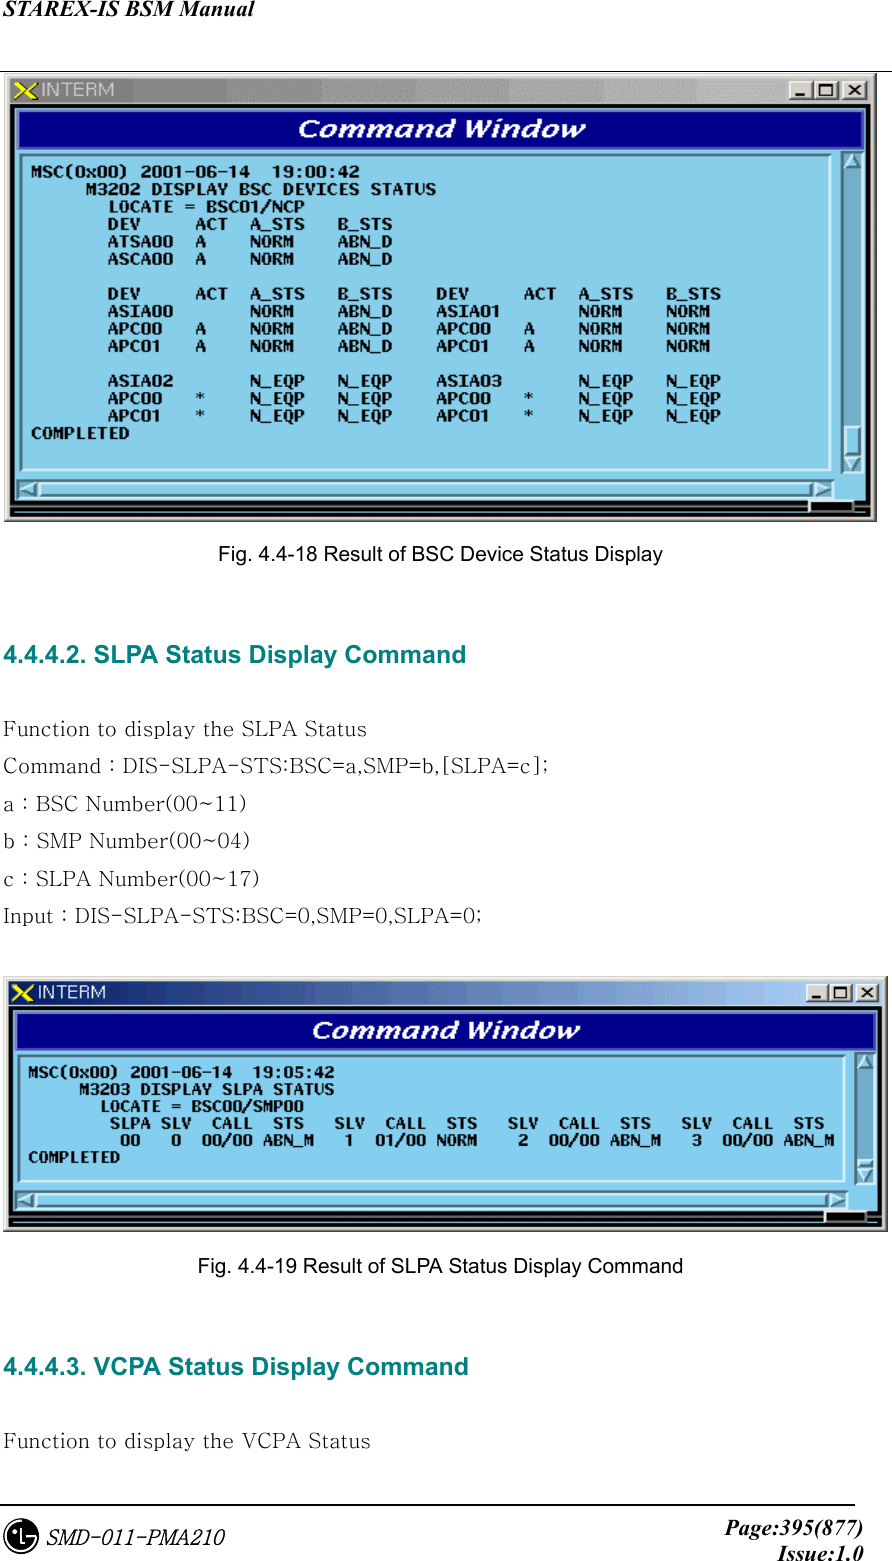 STAREX-IS BSM Manual     Page:395(877)Issue:1.0SMD-011-PMA210  Fig. 4.4-18 Result of BSC Device Status Display  4.4.4.2. SLPA Status Display Command  Function to display the SLPA Status Command : DIS-SLPA-STS:BSC=a,SMP=b,[SLPA=c]; a : BSC Number(00~11) b : SMP Number(00~04) c : SLPA Number(00~17) Input : DIS-SLPA-STS:BSC=0,SMP=0,SLPA=0;   Fig. 4.4-19 Result of SLPA Status Display Command  4.4.4.3. VCPA Status Display Command  Function to display the VCPA Status 